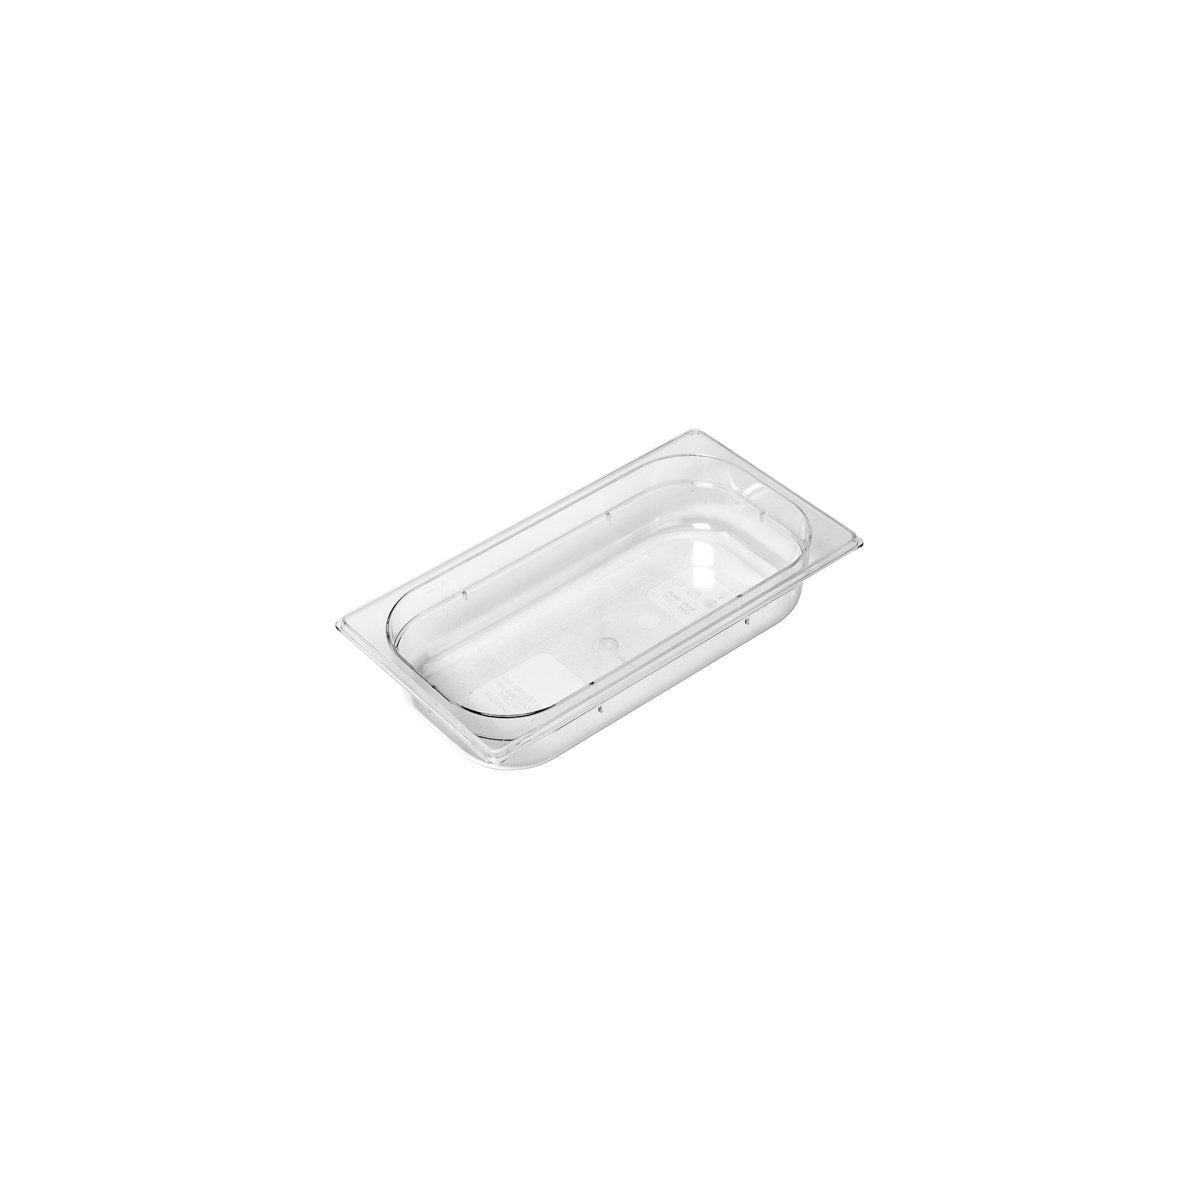 PC-13065CL Inox Macel Gastronorm Pan Polycarbonate Clear 1/3 Size 65mm Tomkin Australia Hospitality Supplies